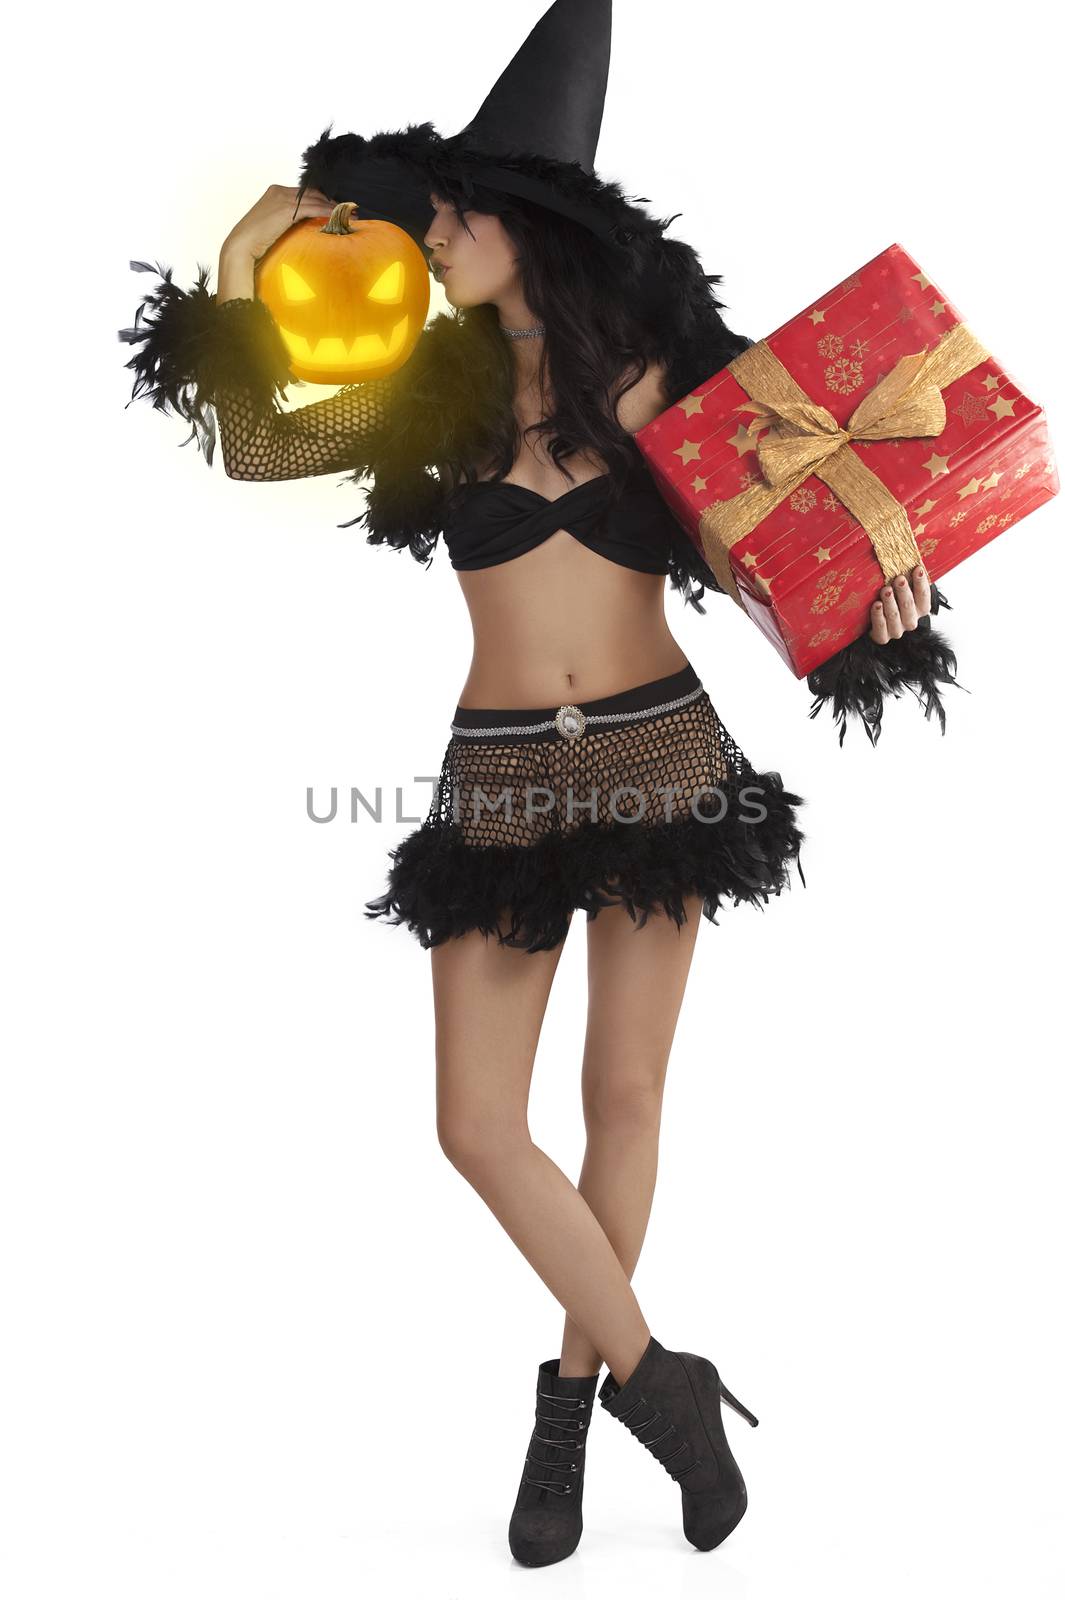 very pretty young brunette in black witch dress with hat and high heel ready for halloween standing with gift box and jack-o'-lantern